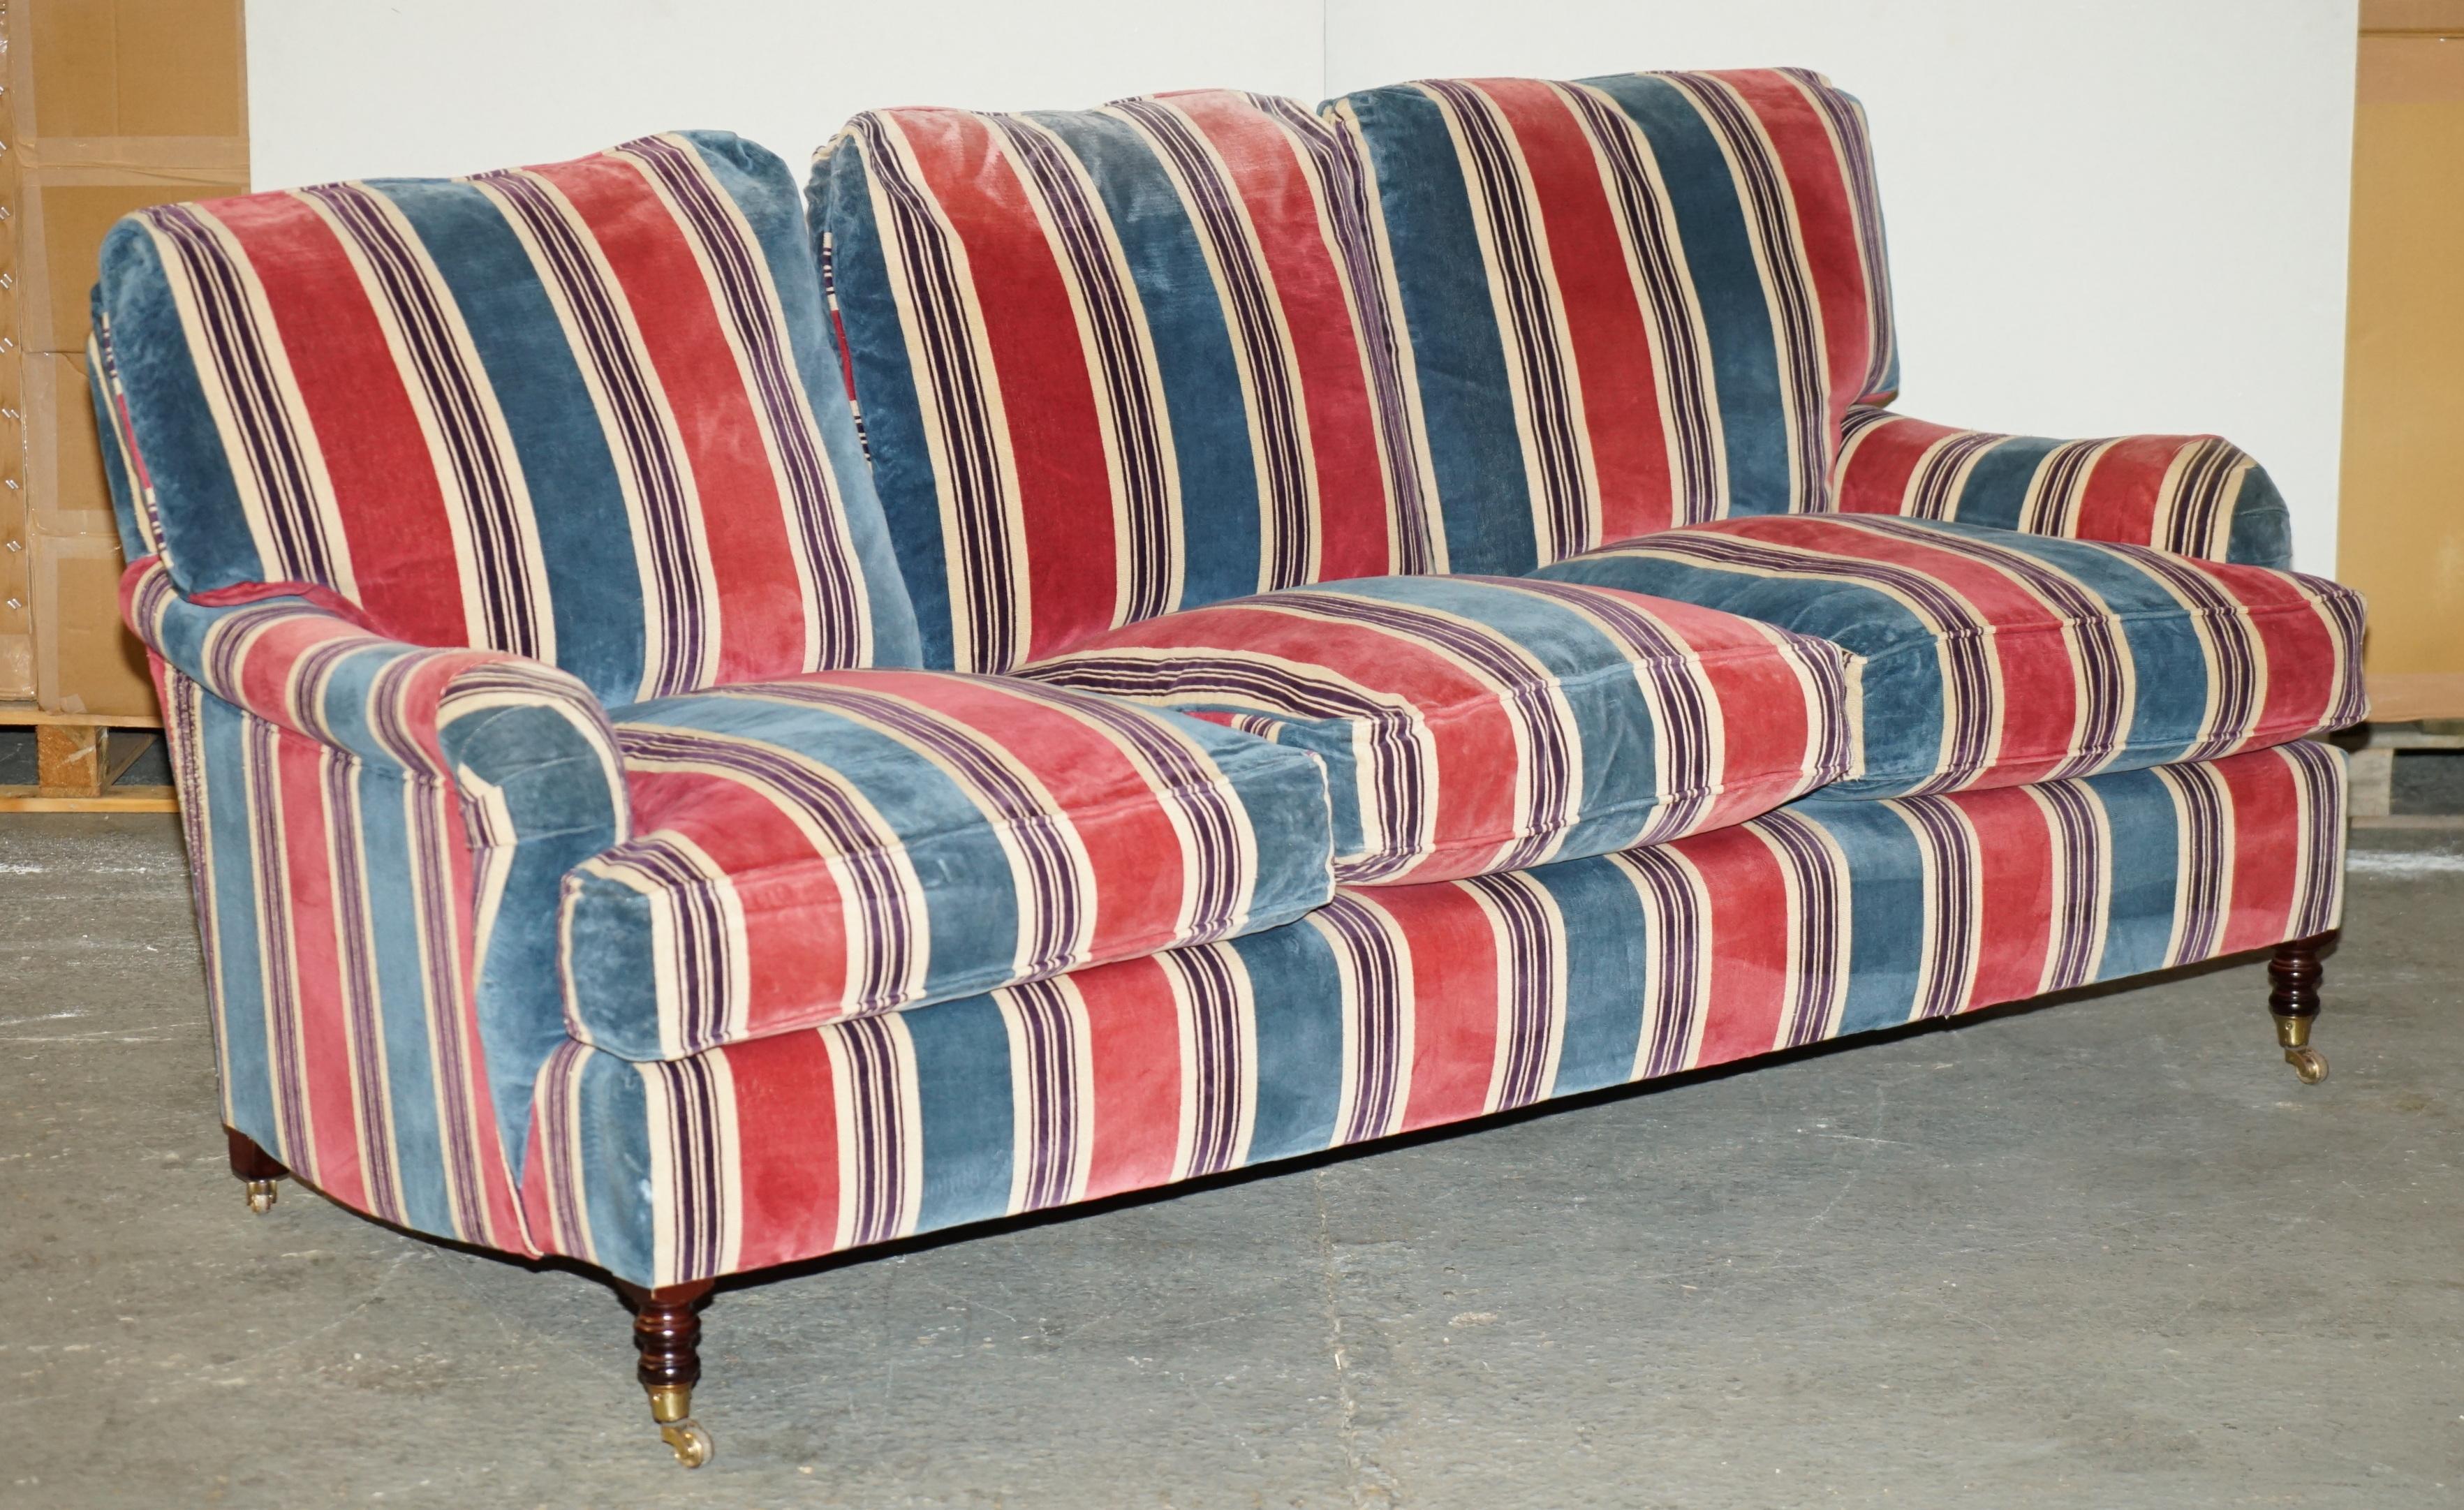 Victorian PAiR OF GEORGE SMITH CHELSEA SIGNATURE SCROLL ARM SOFAS HOWARD & SON'S MODEL For Sale